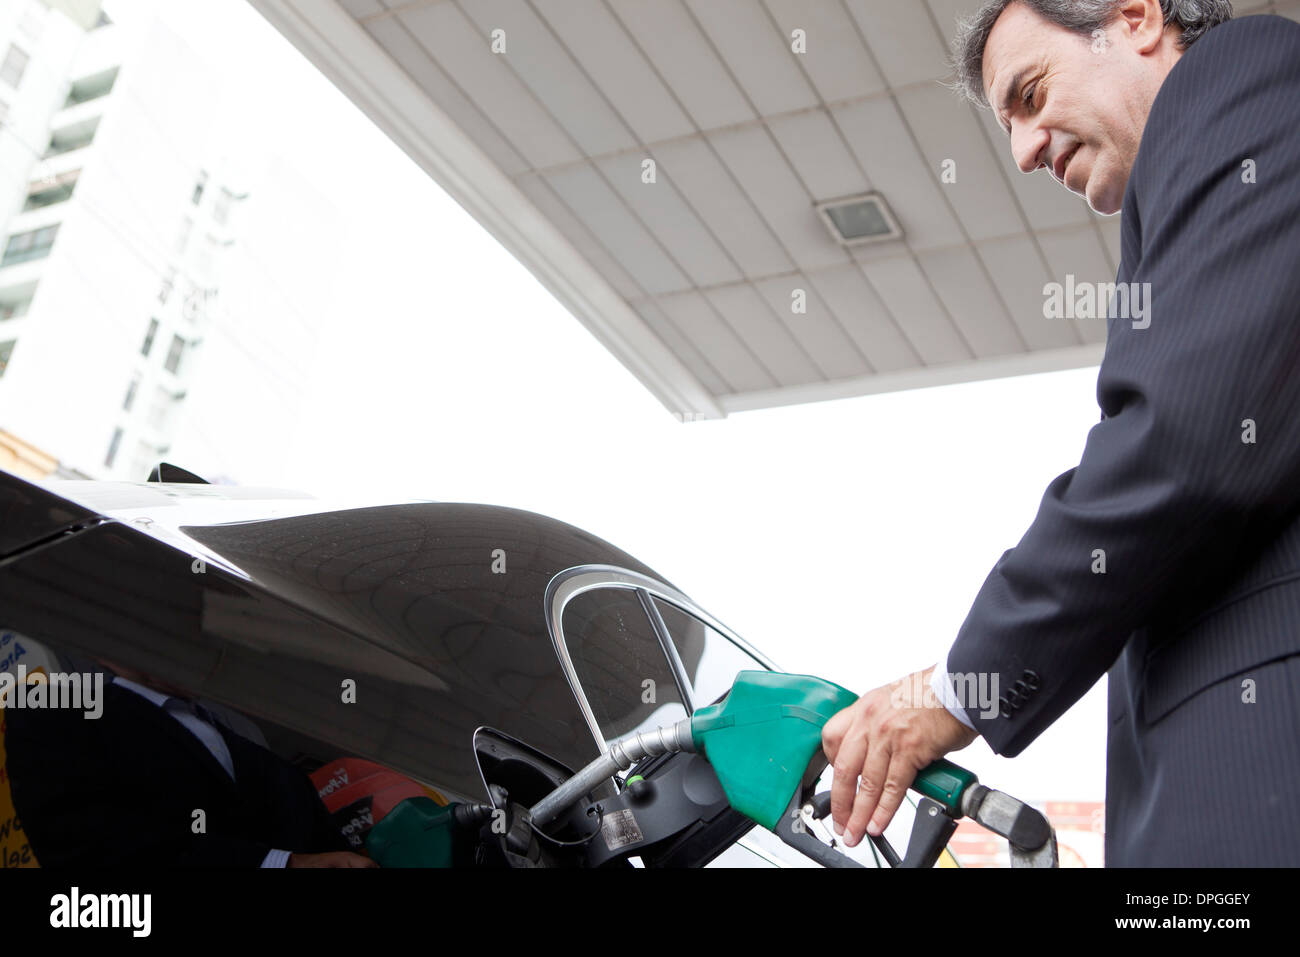 Businessman refueling car at gas station Stock Photo